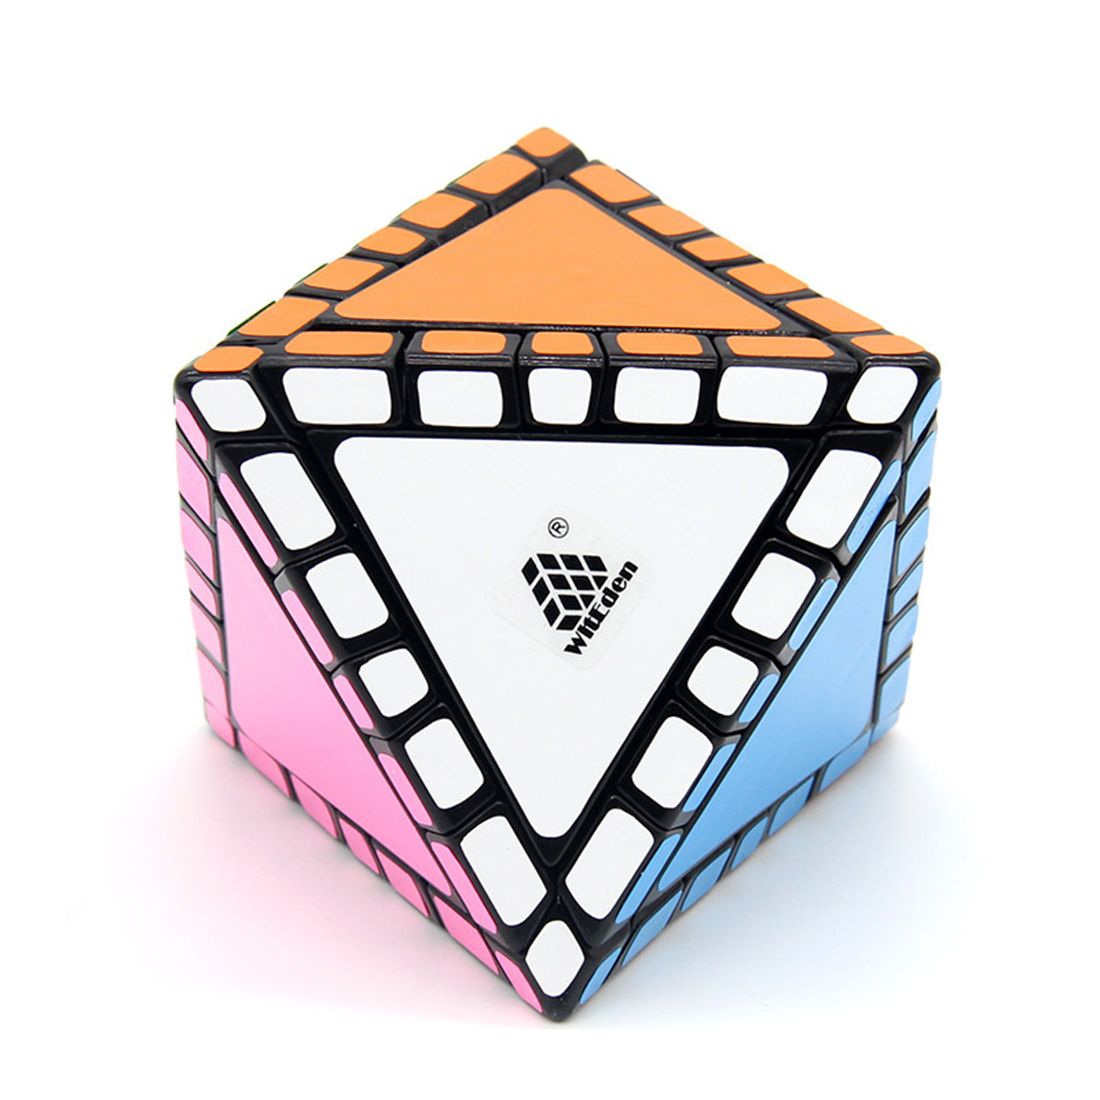 WitEden Octahedral Mixup Magic Cube (No.2 Edition)